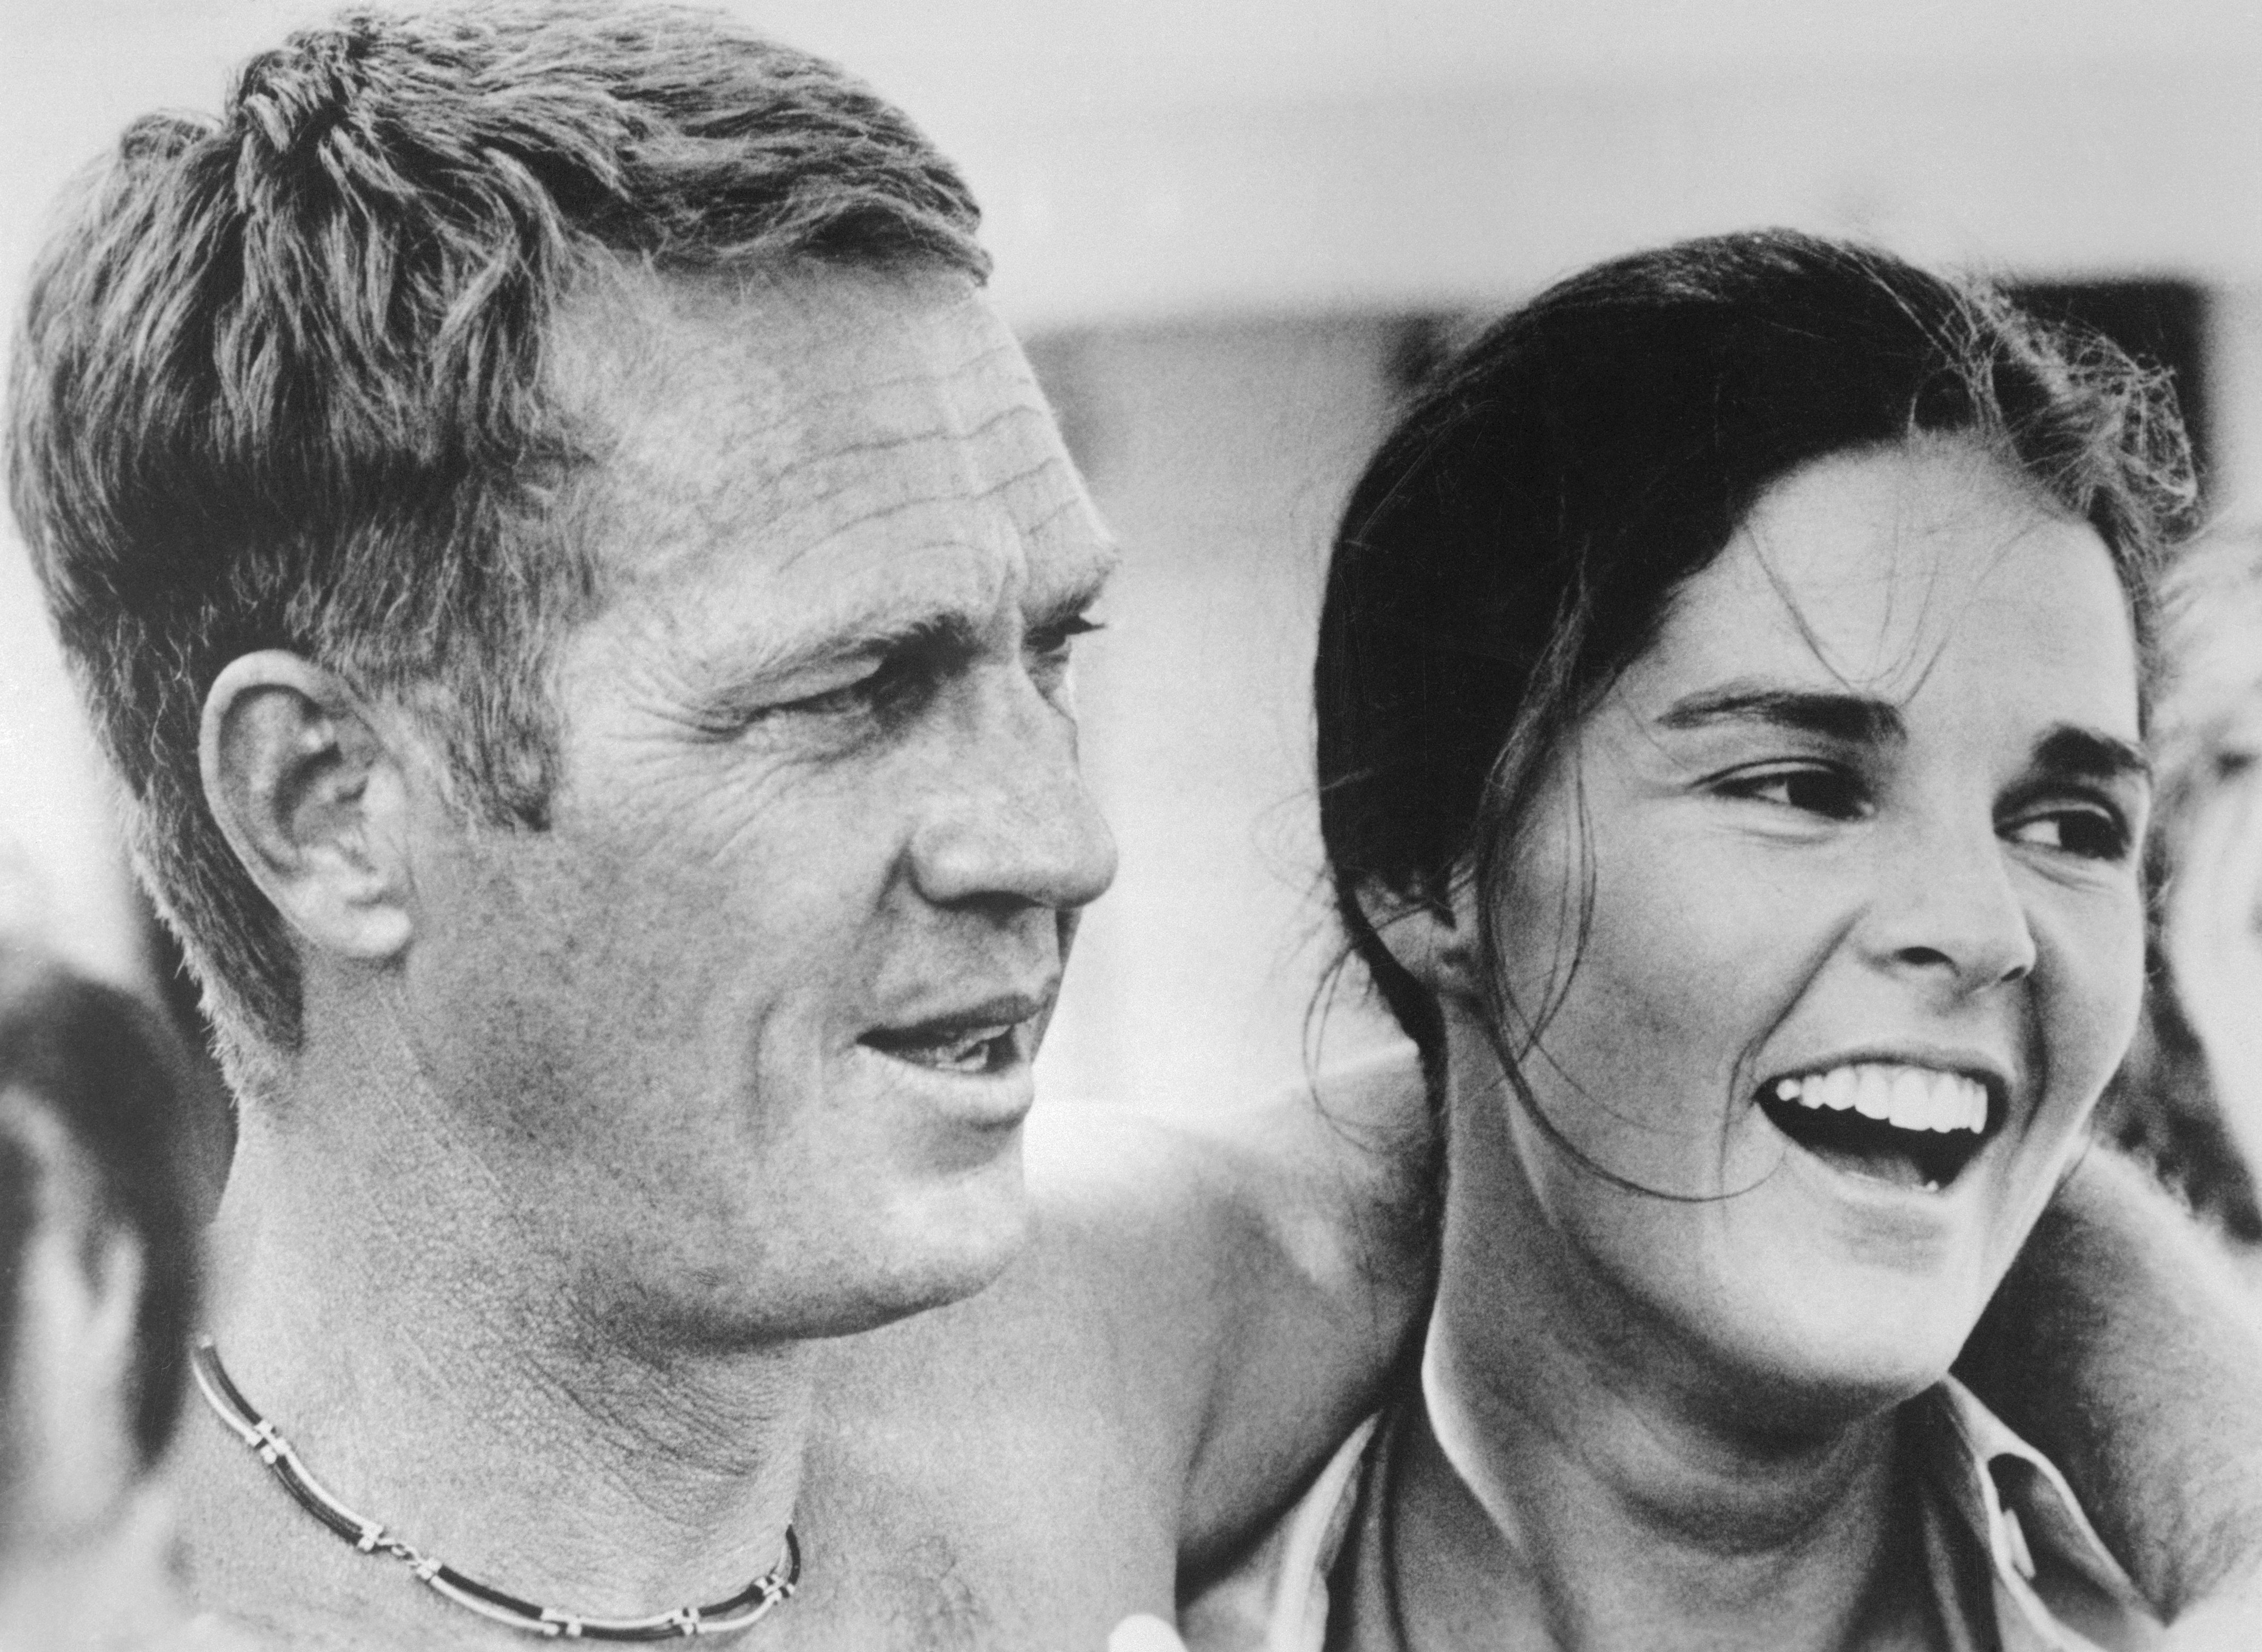 Steve McQueen and Ali MacGraw in a scene from the 1972 movie "The Getaway" | Source: Getty Images